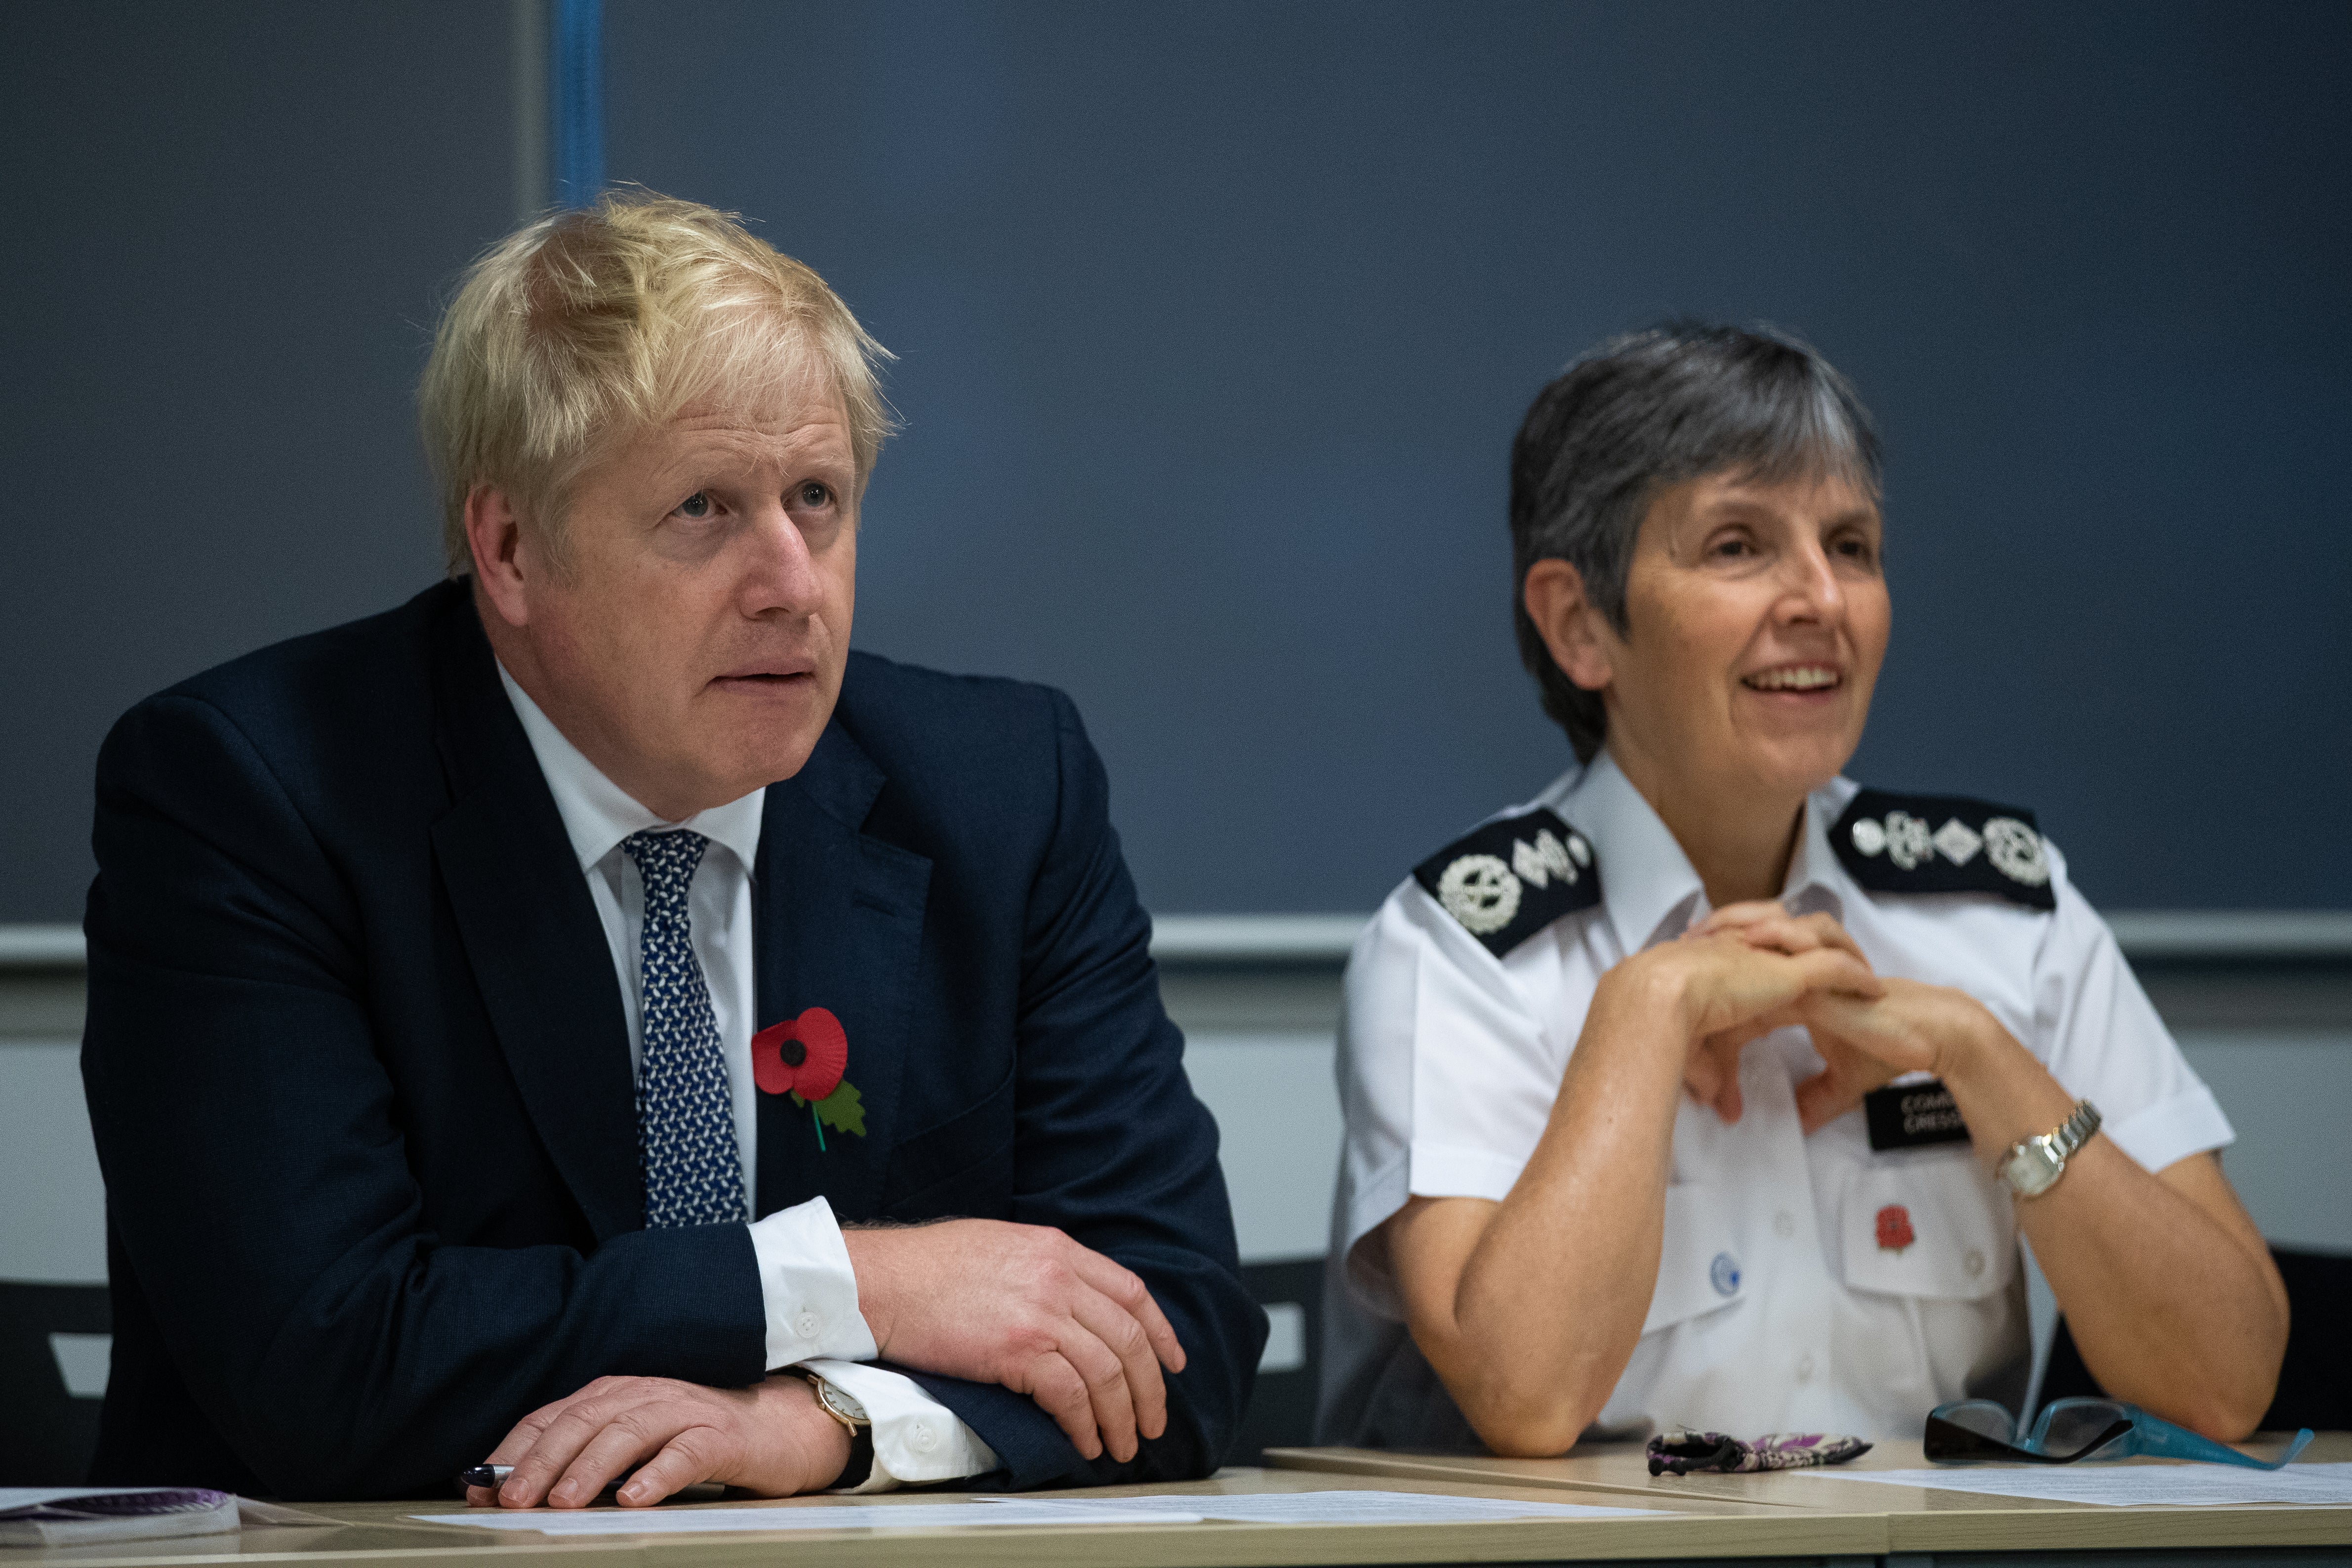 Prime Minister Boris Johnson and Police Commissioner Cressida Dick during a visit to Metropolitan Police training college in Hendon, north London. The PM has failed twice to back Britain’s most senior police officer as the right person to fight county lines drugs gangs. In an interview with LBC Mr Johnson was asked if Metropolitan Police Commissioner Dame Cressida Dick should lead the battle against the criminal networks, but twice avoided answering the question (Aaron Chown/PA)